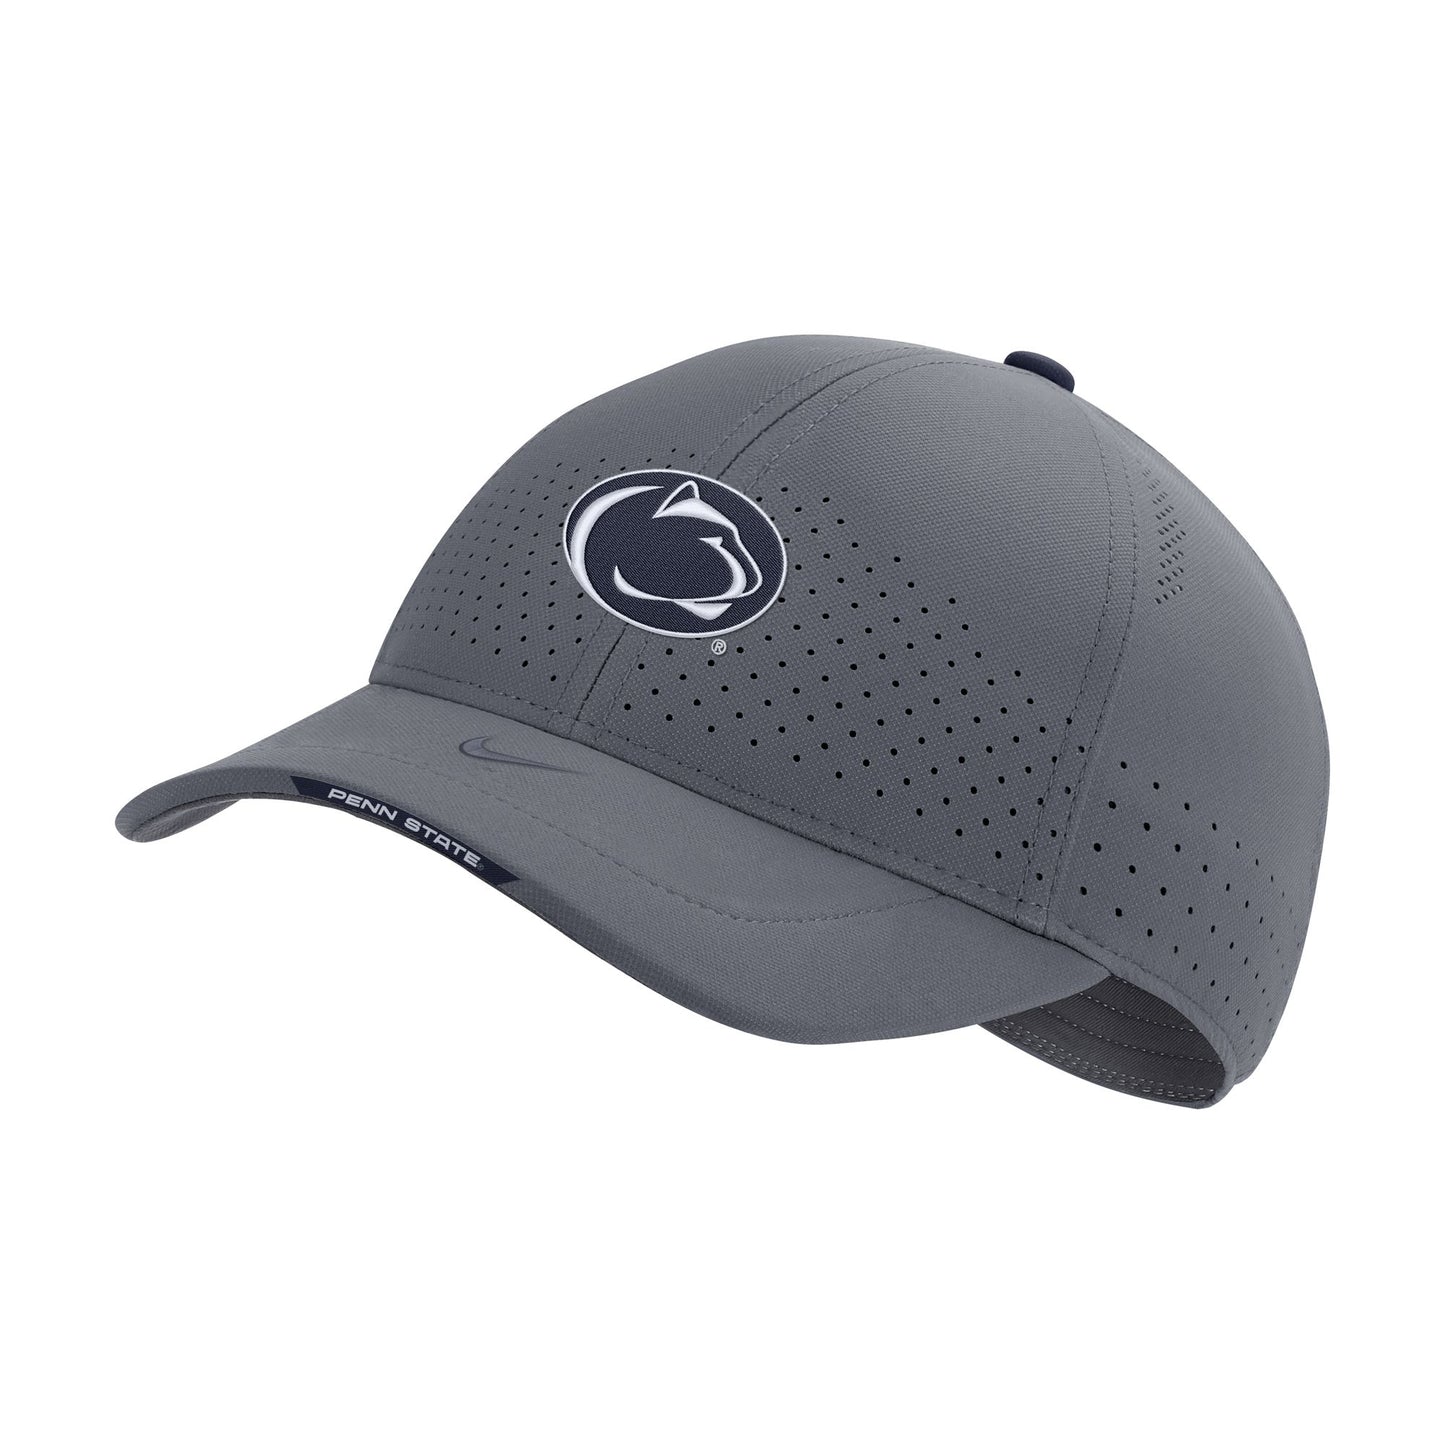 Men's Penn State Nittany Lions Gray Authentic Team Issue Aerobill Flex Hat